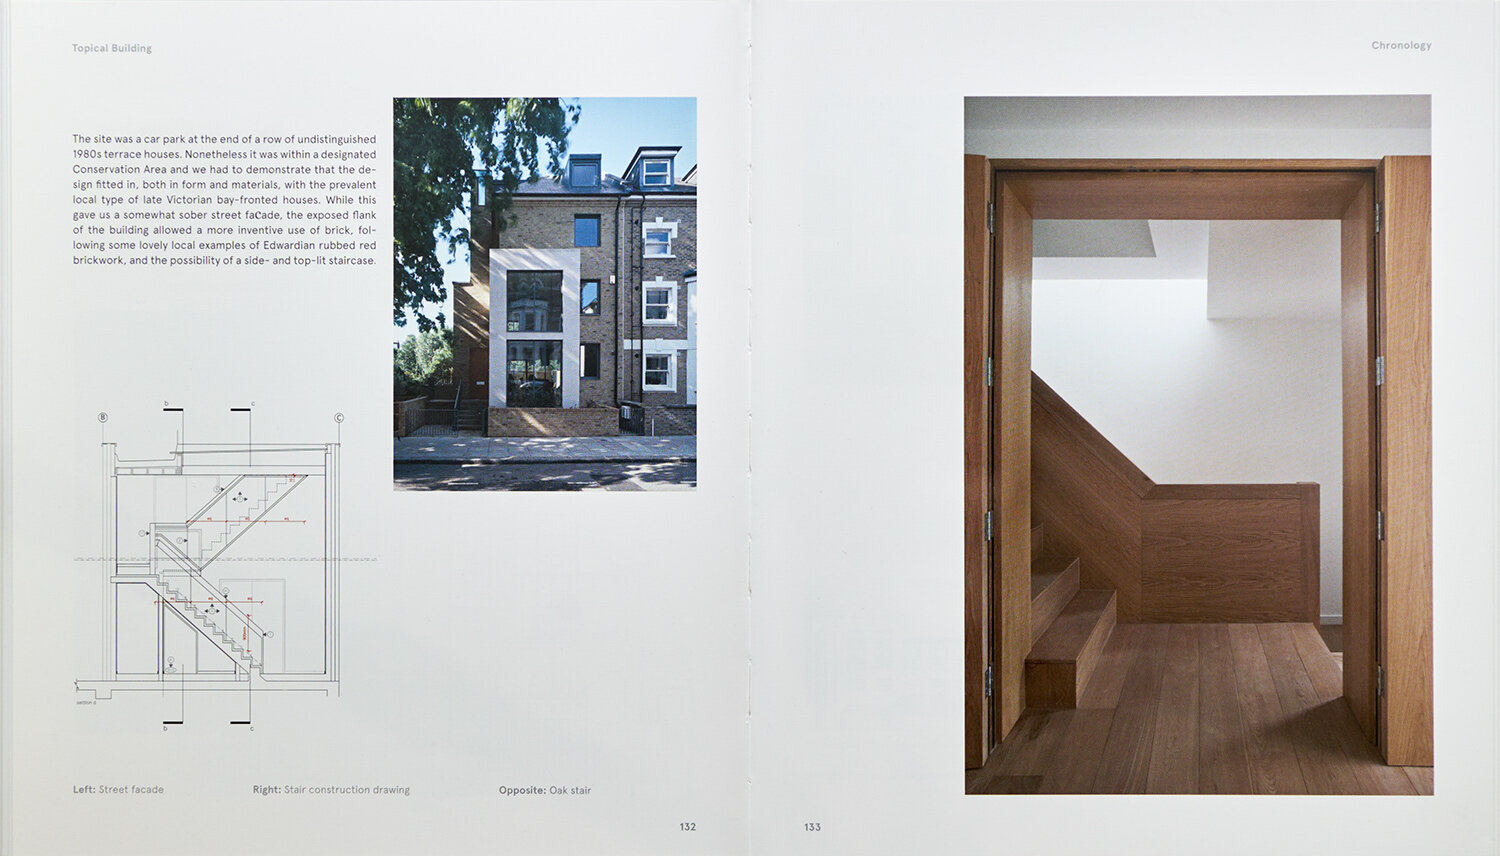 Topical Building (book) - private residence